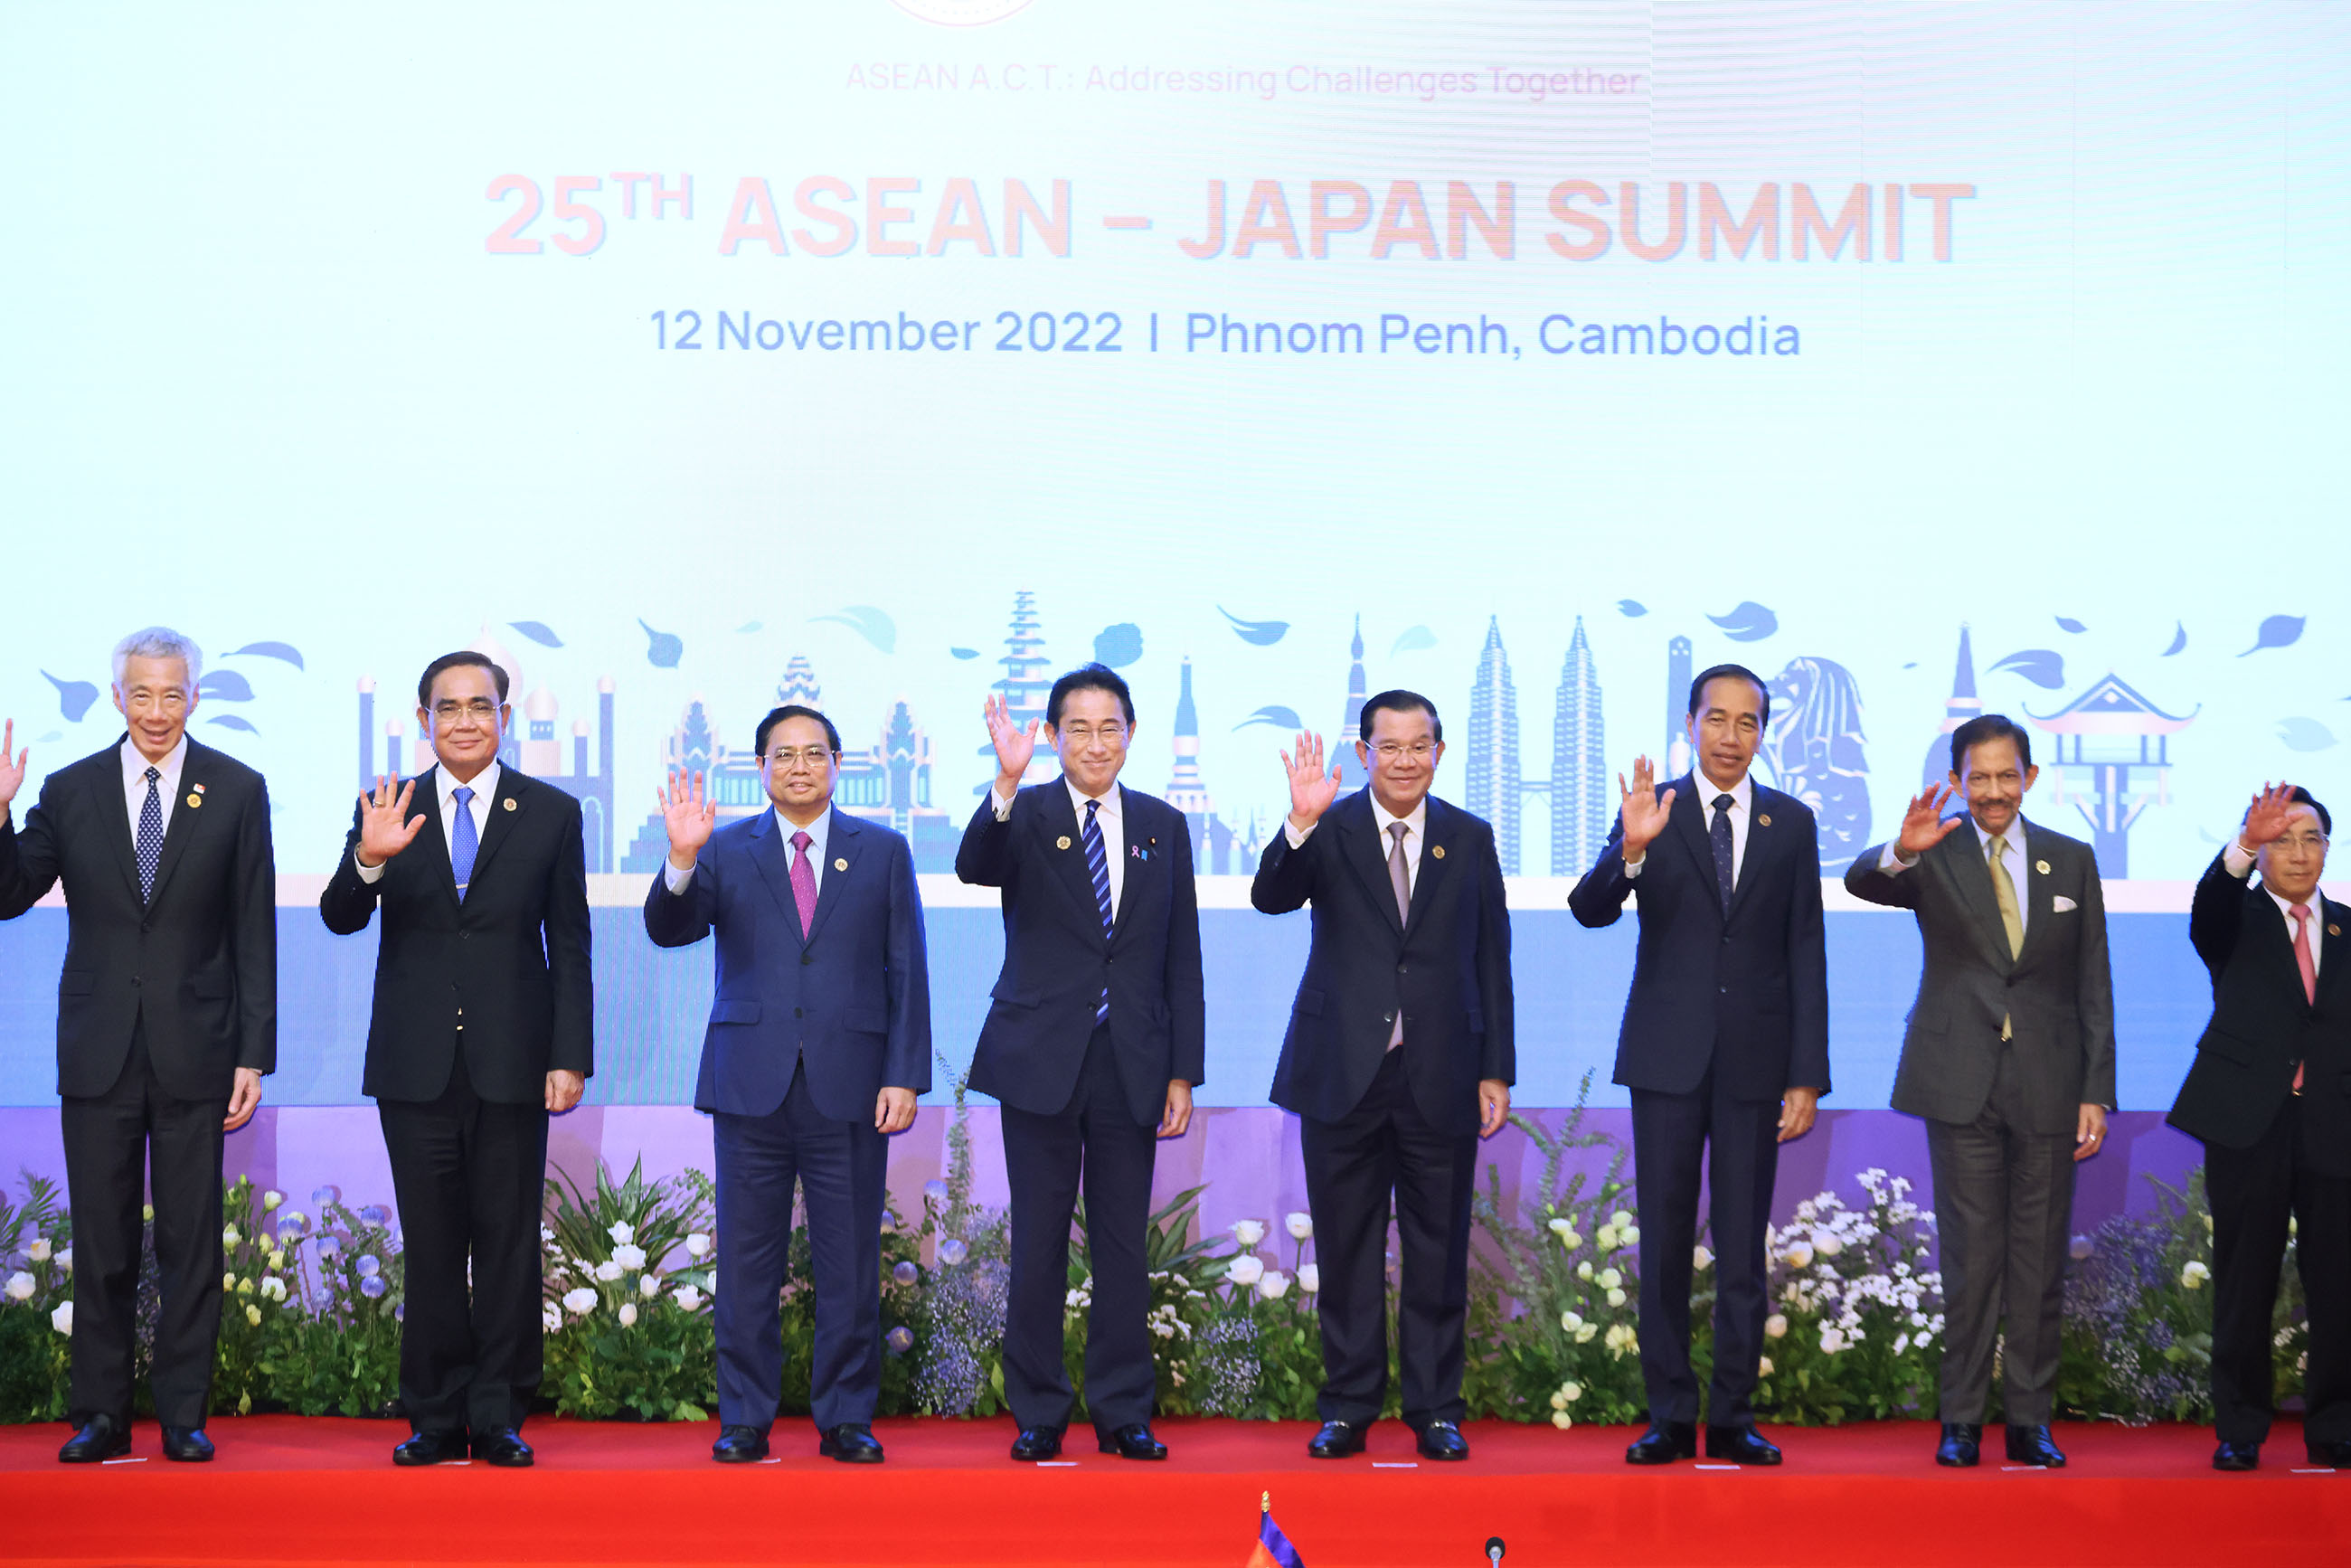 Photograph of the Prime Minister at a photograph session with ASEAN leaders (2)